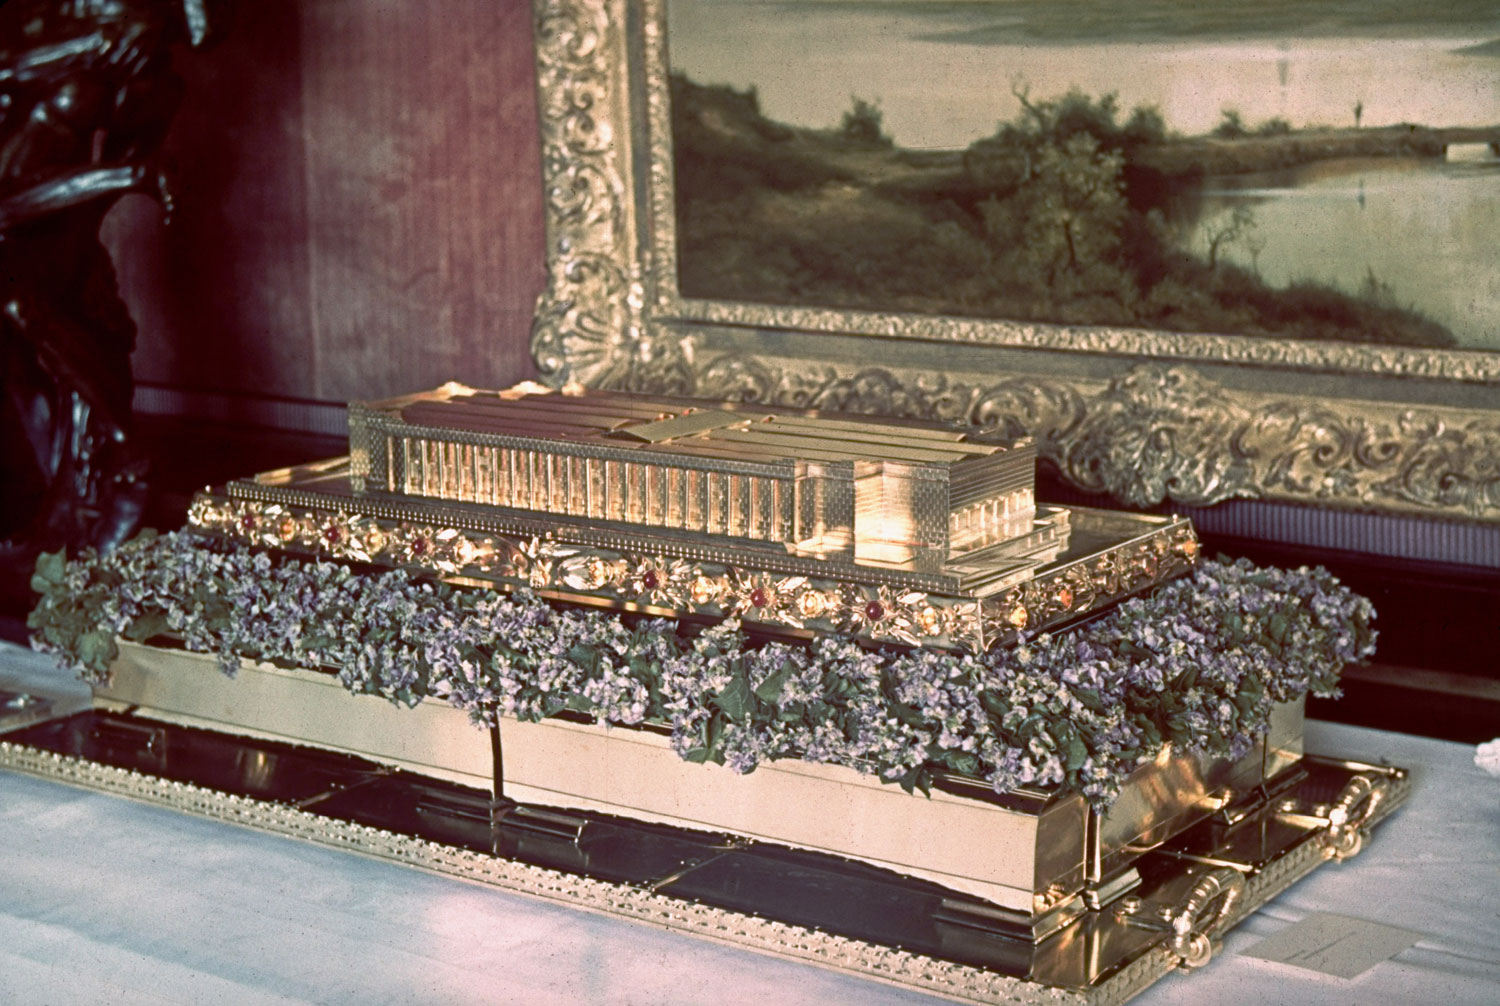 Solid gold model of the Haus der Deutschen Kunst (a celebrated German museum), a gift from Luftwaffe commander — and future suicide at the Nuremberg war crimes trials — Hermann Goering to Adolf Hitler on Hitler's 50th birthday, April 20, 1939.